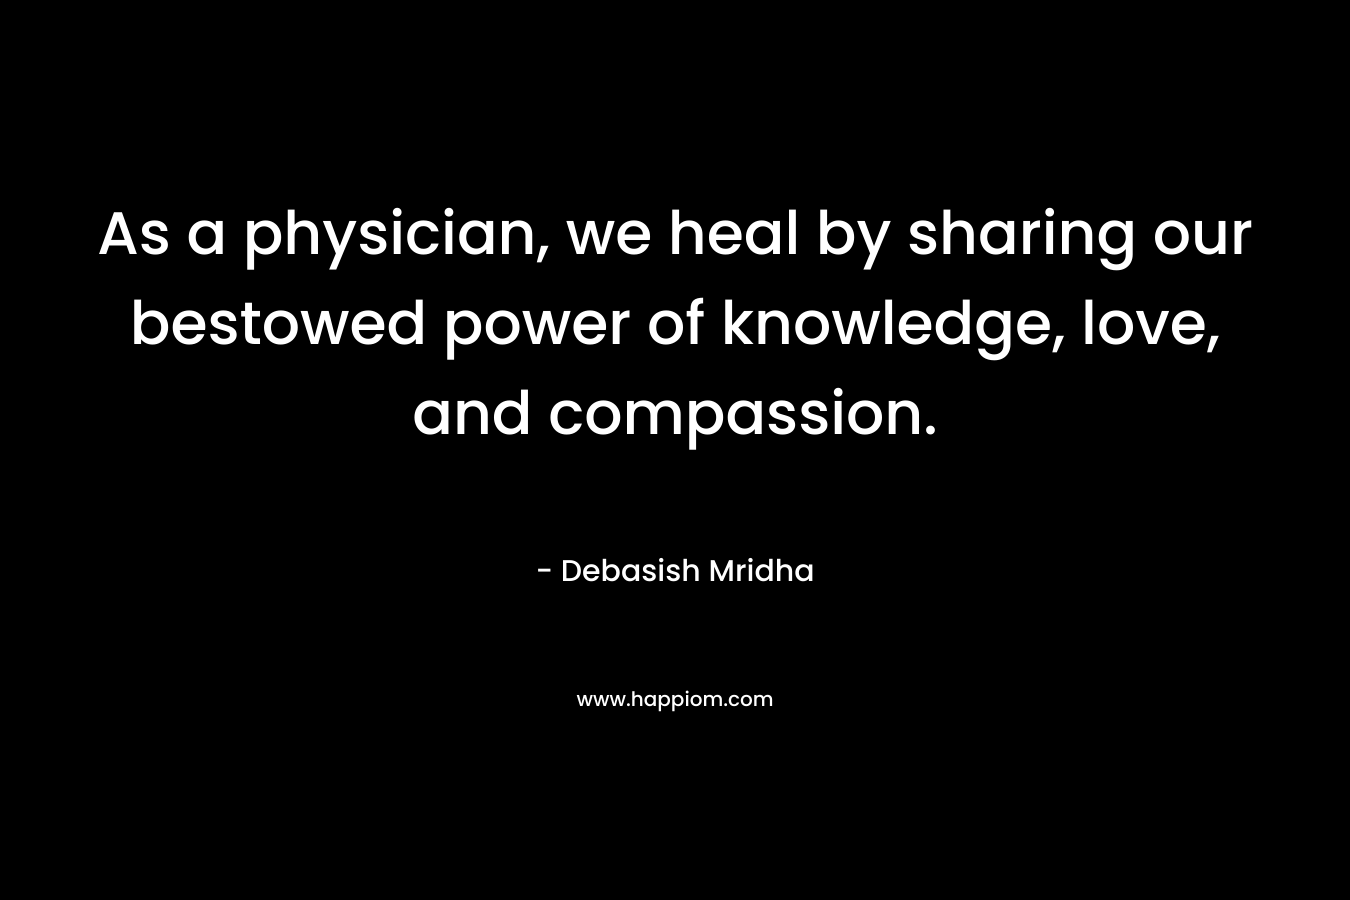 As a physician, we heal by sharing our bestowed power of knowledge, love, and compassion. – Debasish Mridha